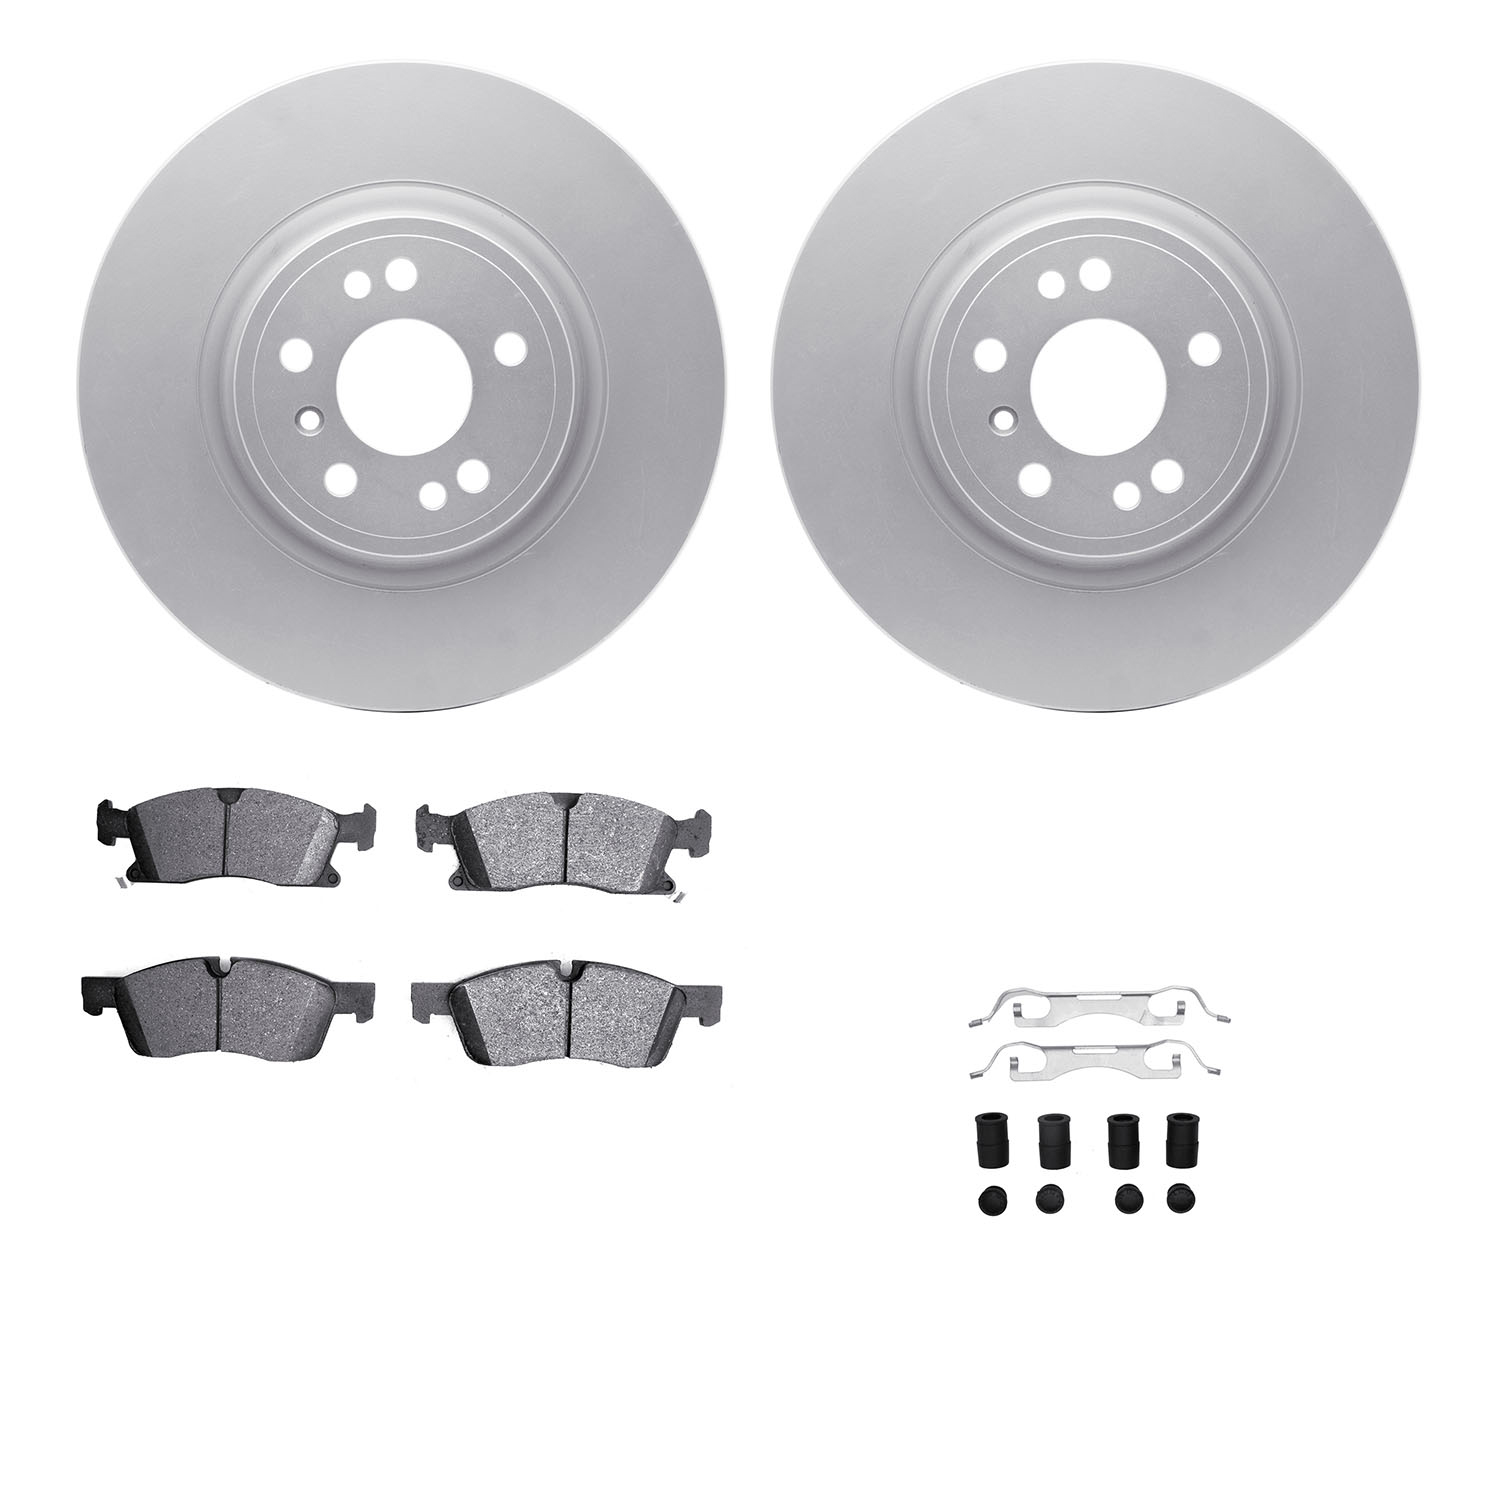 4412-63001 Geospec Brake Rotors with Ultimate-Duty Brake Pads & Hardware, 2012-2018 Mercedes-Benz, Position: Front